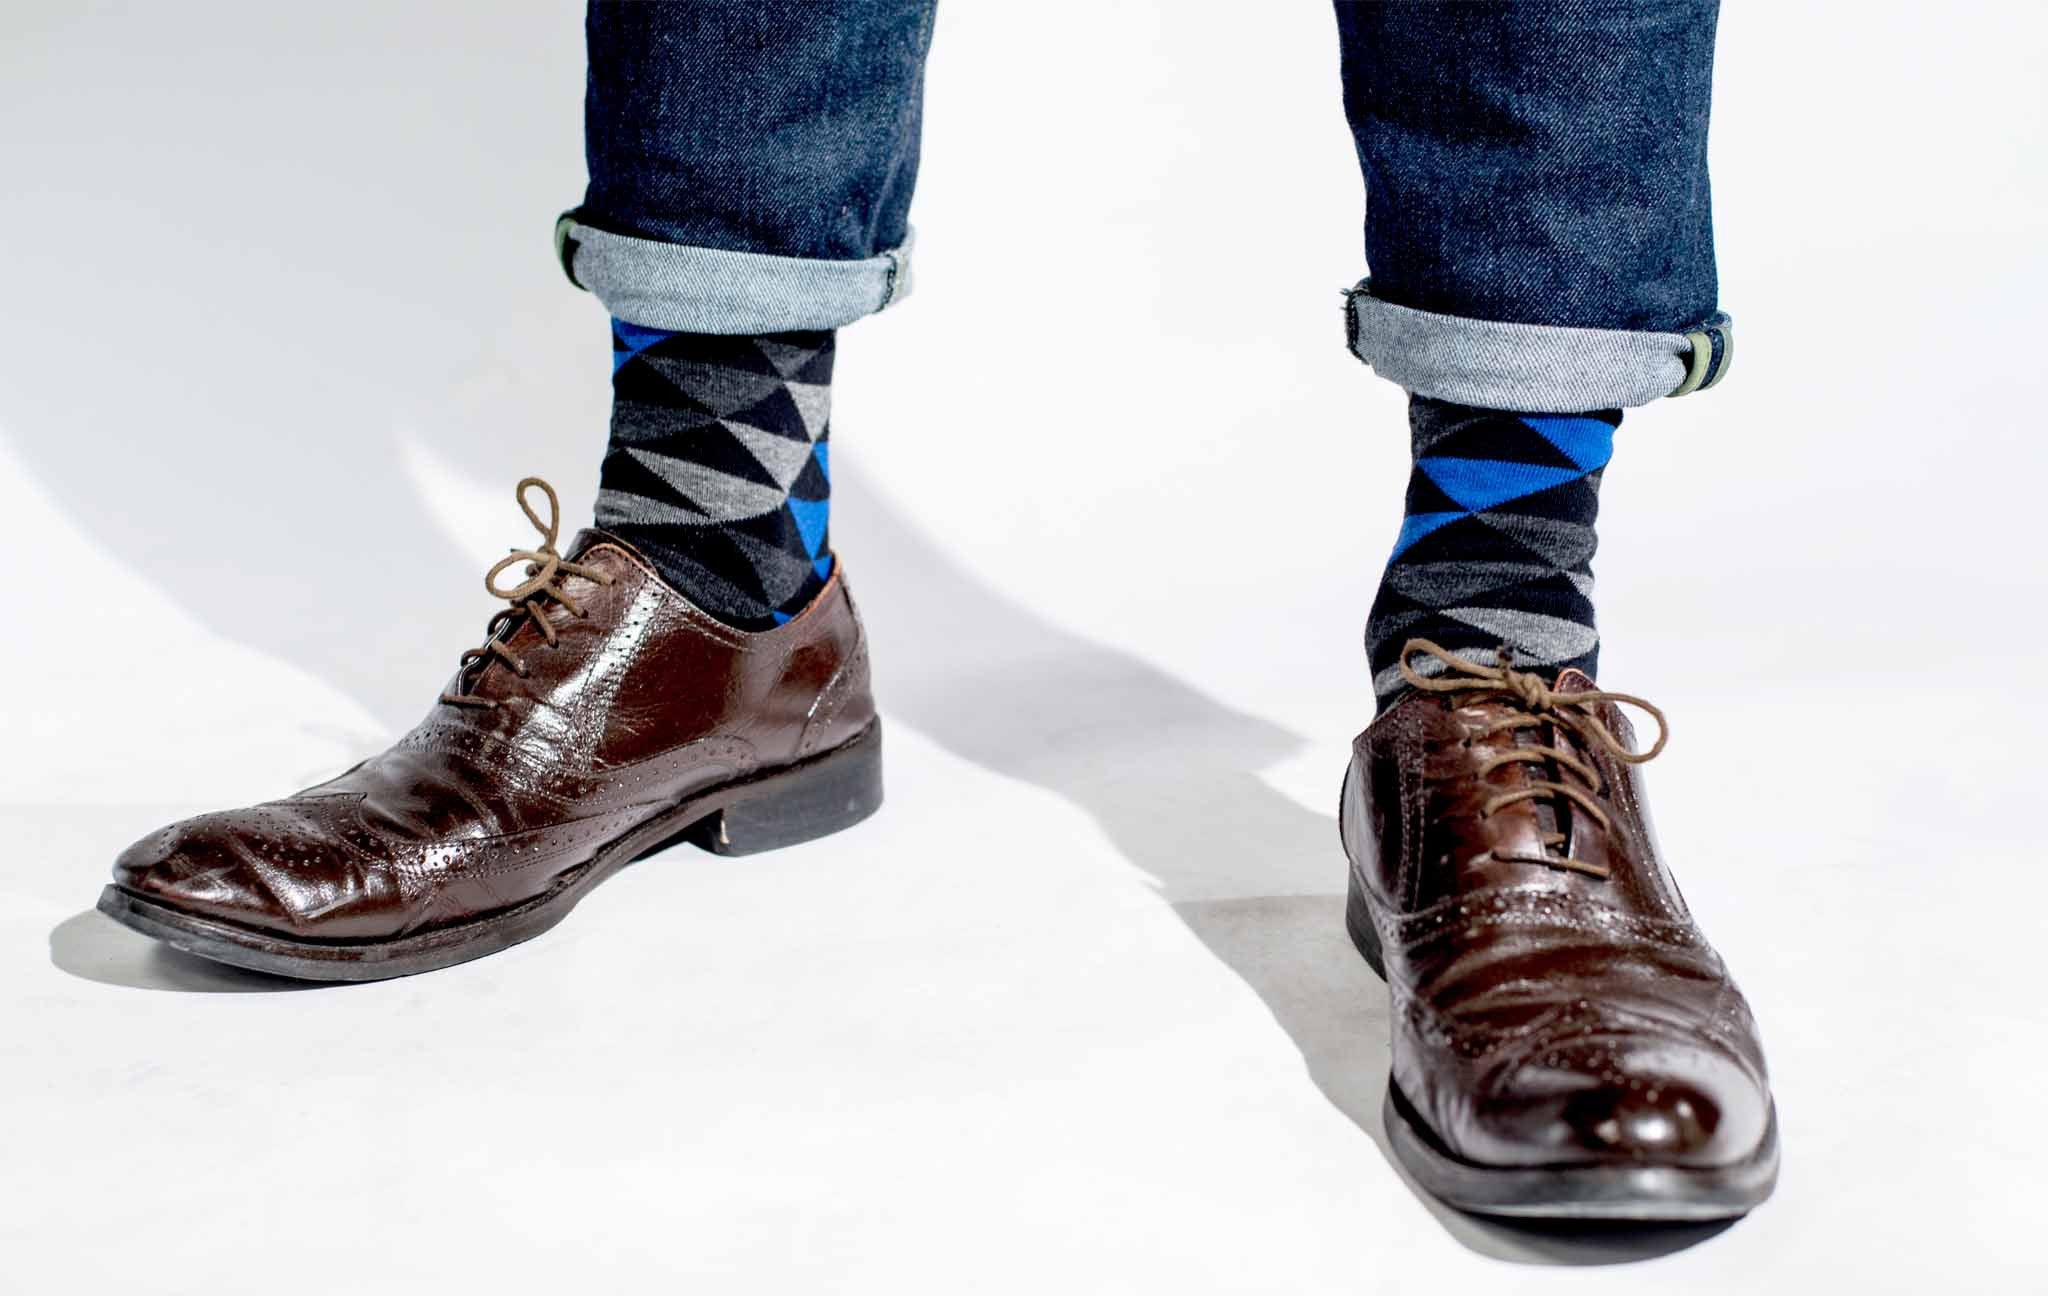 dress shoes with blue jeans